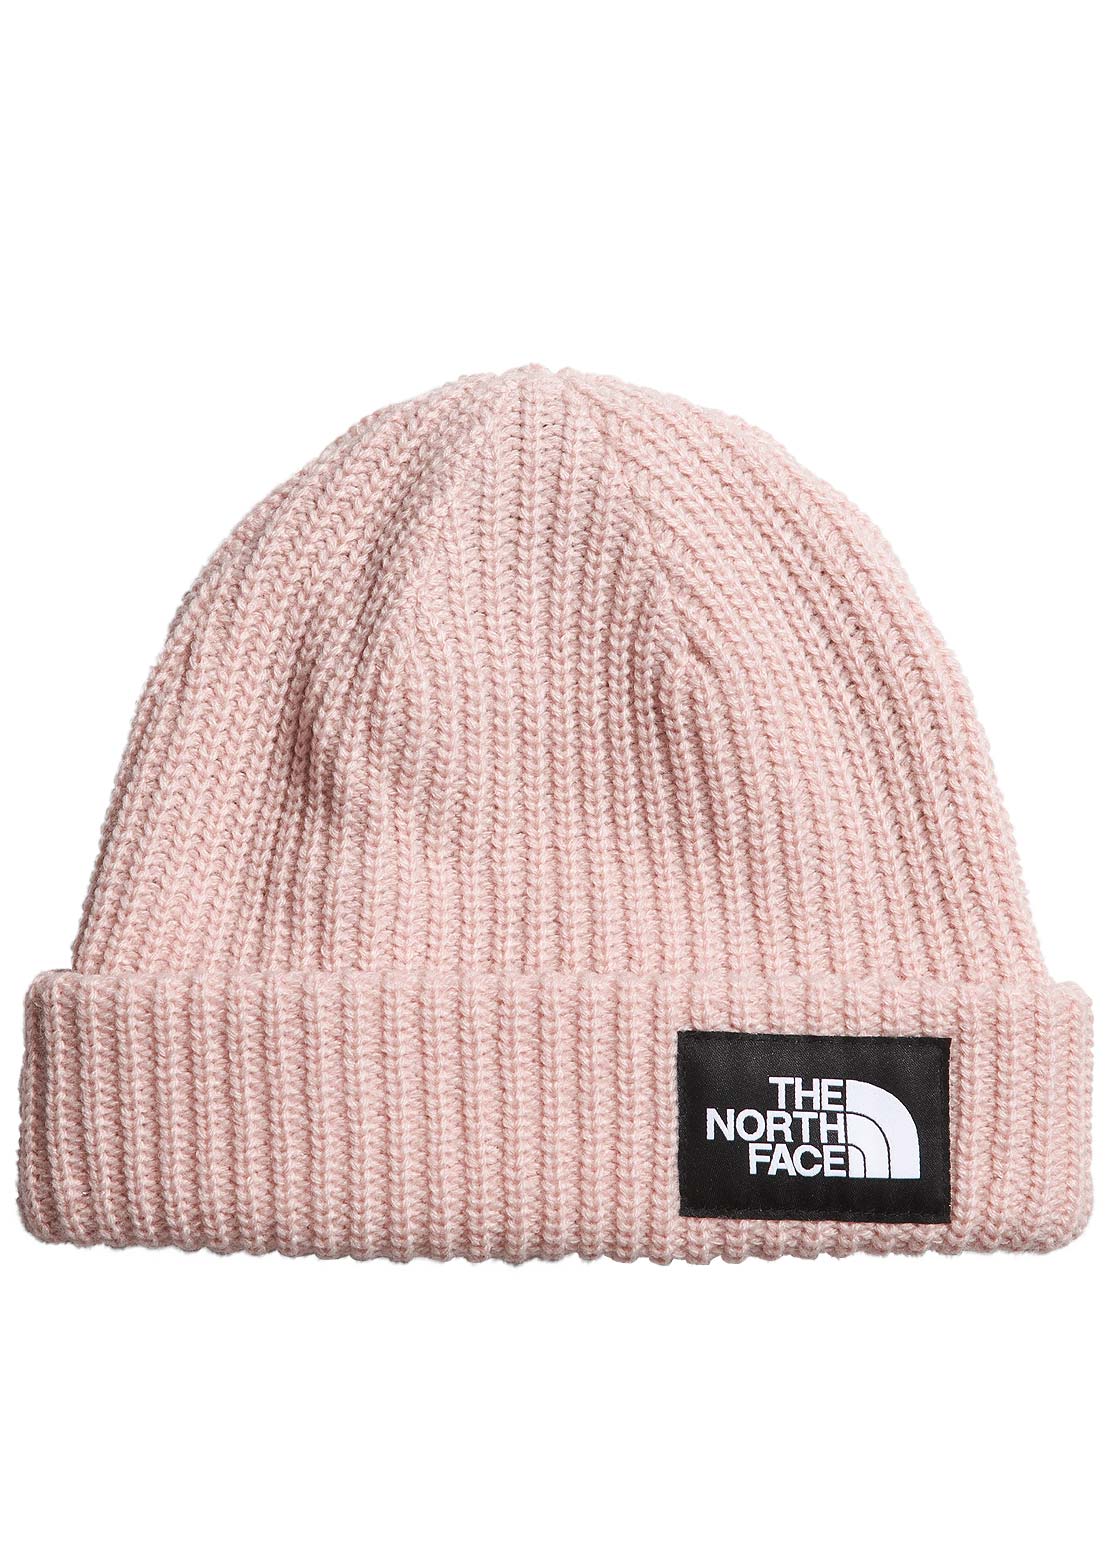 The North Face Junior Salty Dog Lined Beanie Pink Moss